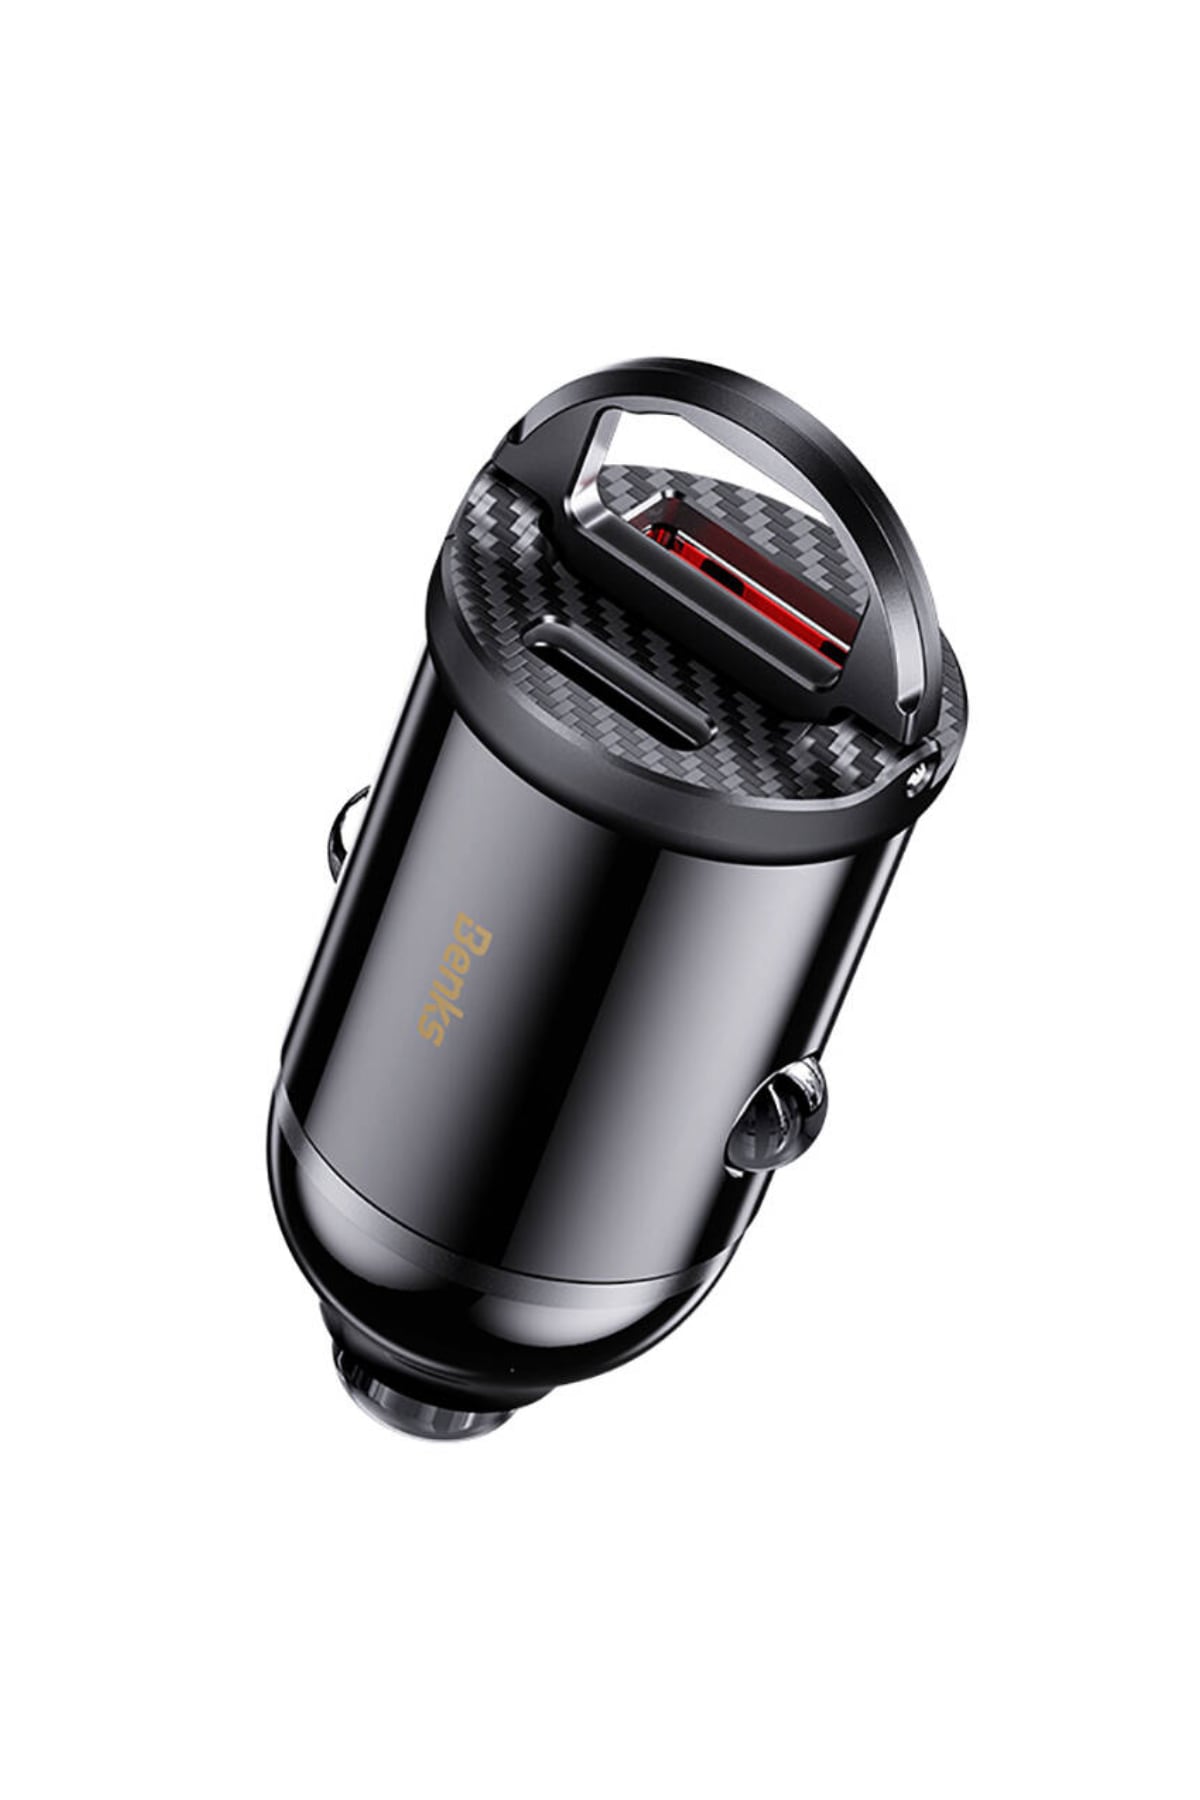 Benks C30SE Fast Charging Dual Port PD Car Charger 30W Max